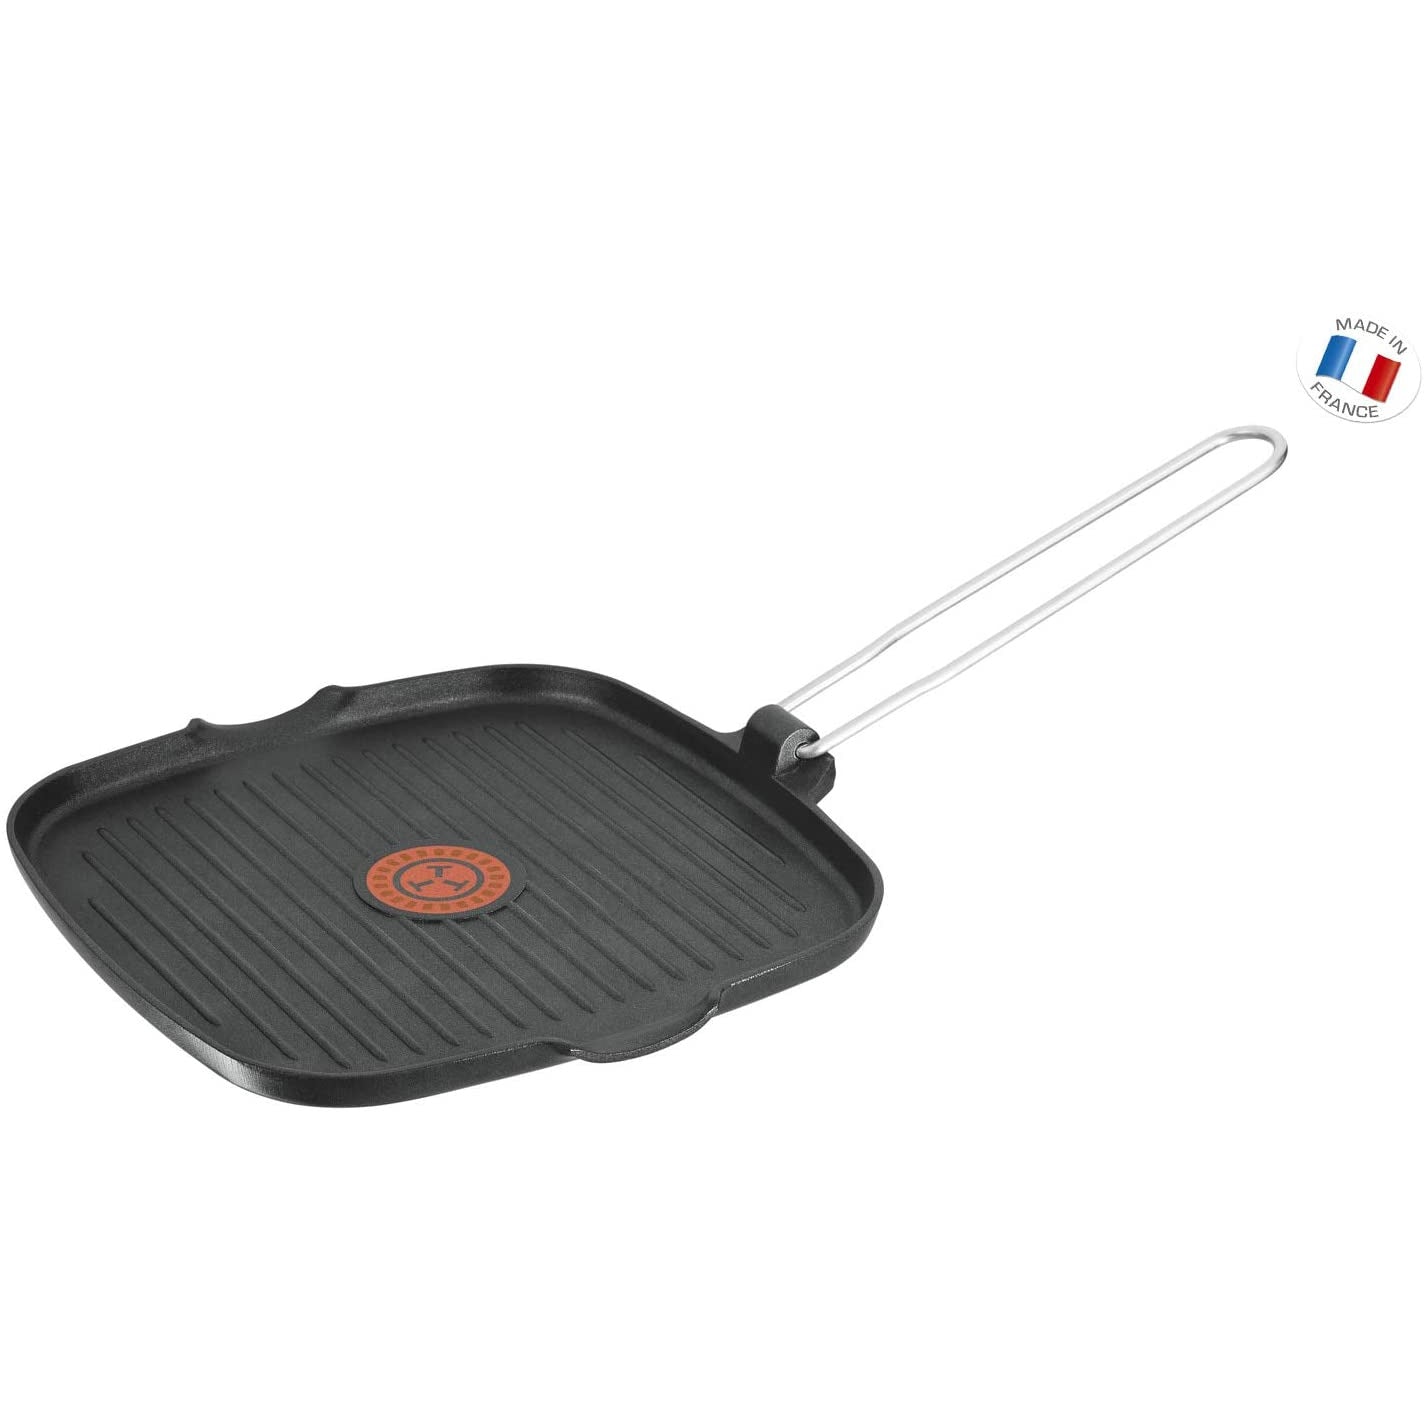 TEFAL IDEAL Poele Grill A2413512 24x24cm